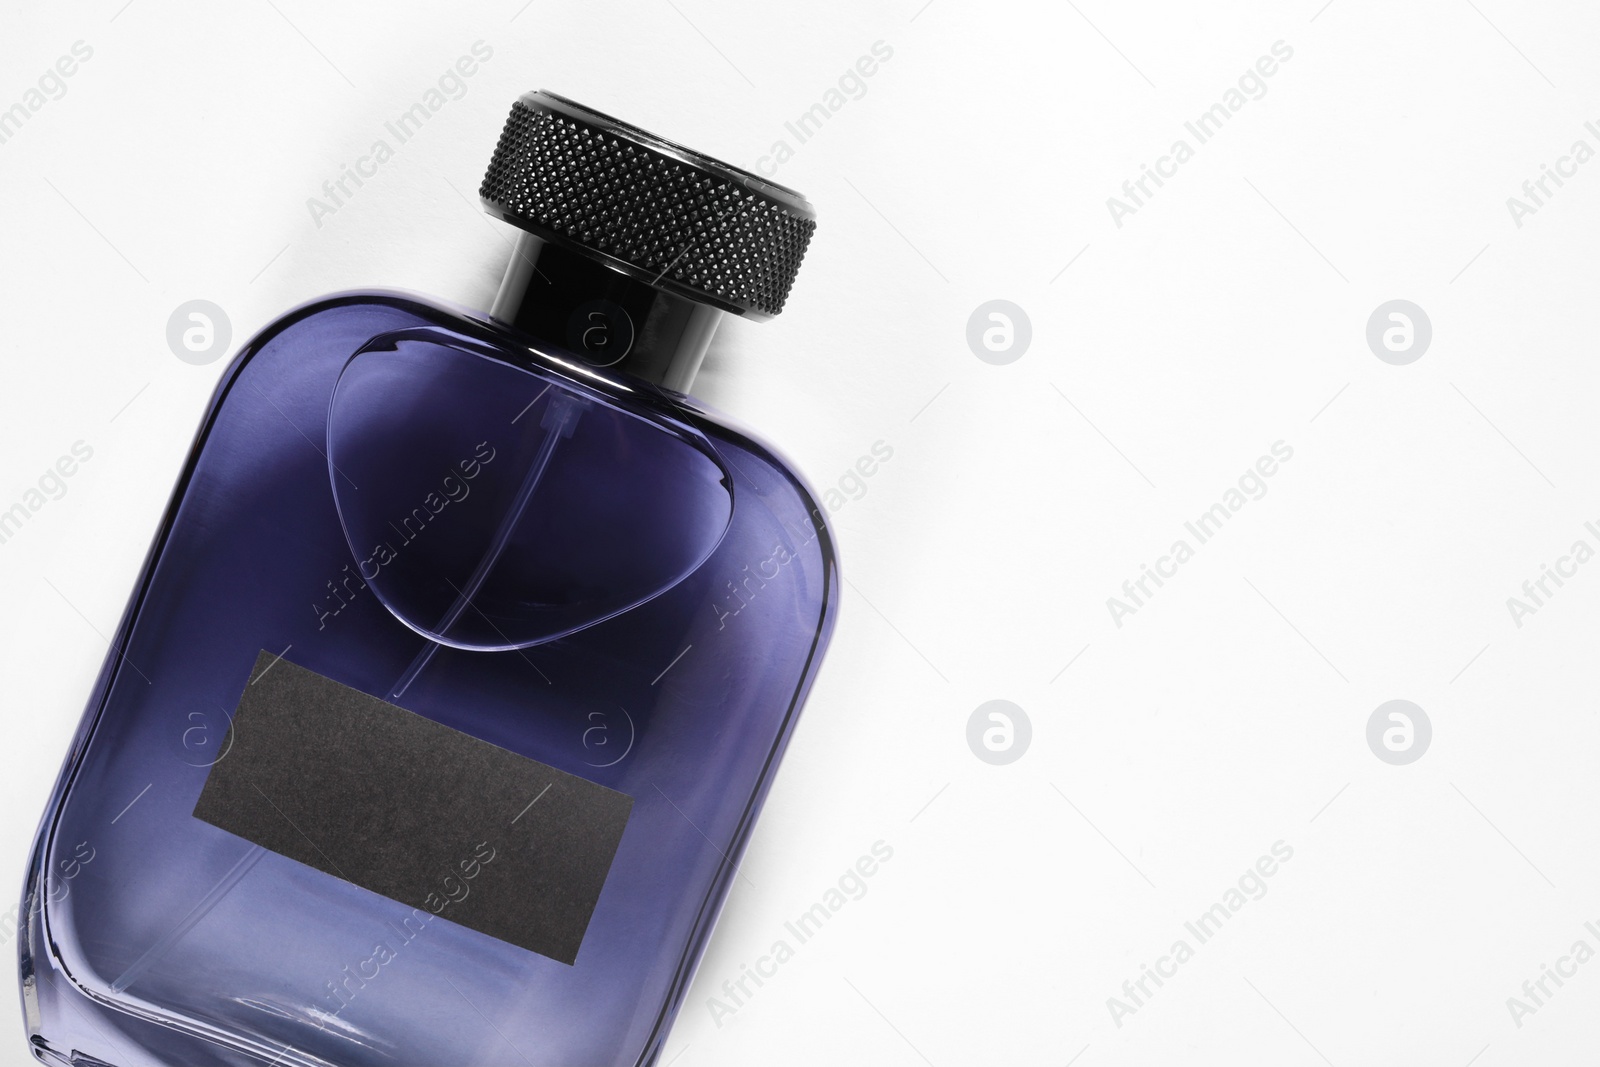 Photo of Luxury men`s perfume in bottle on white background, top view. Space for text